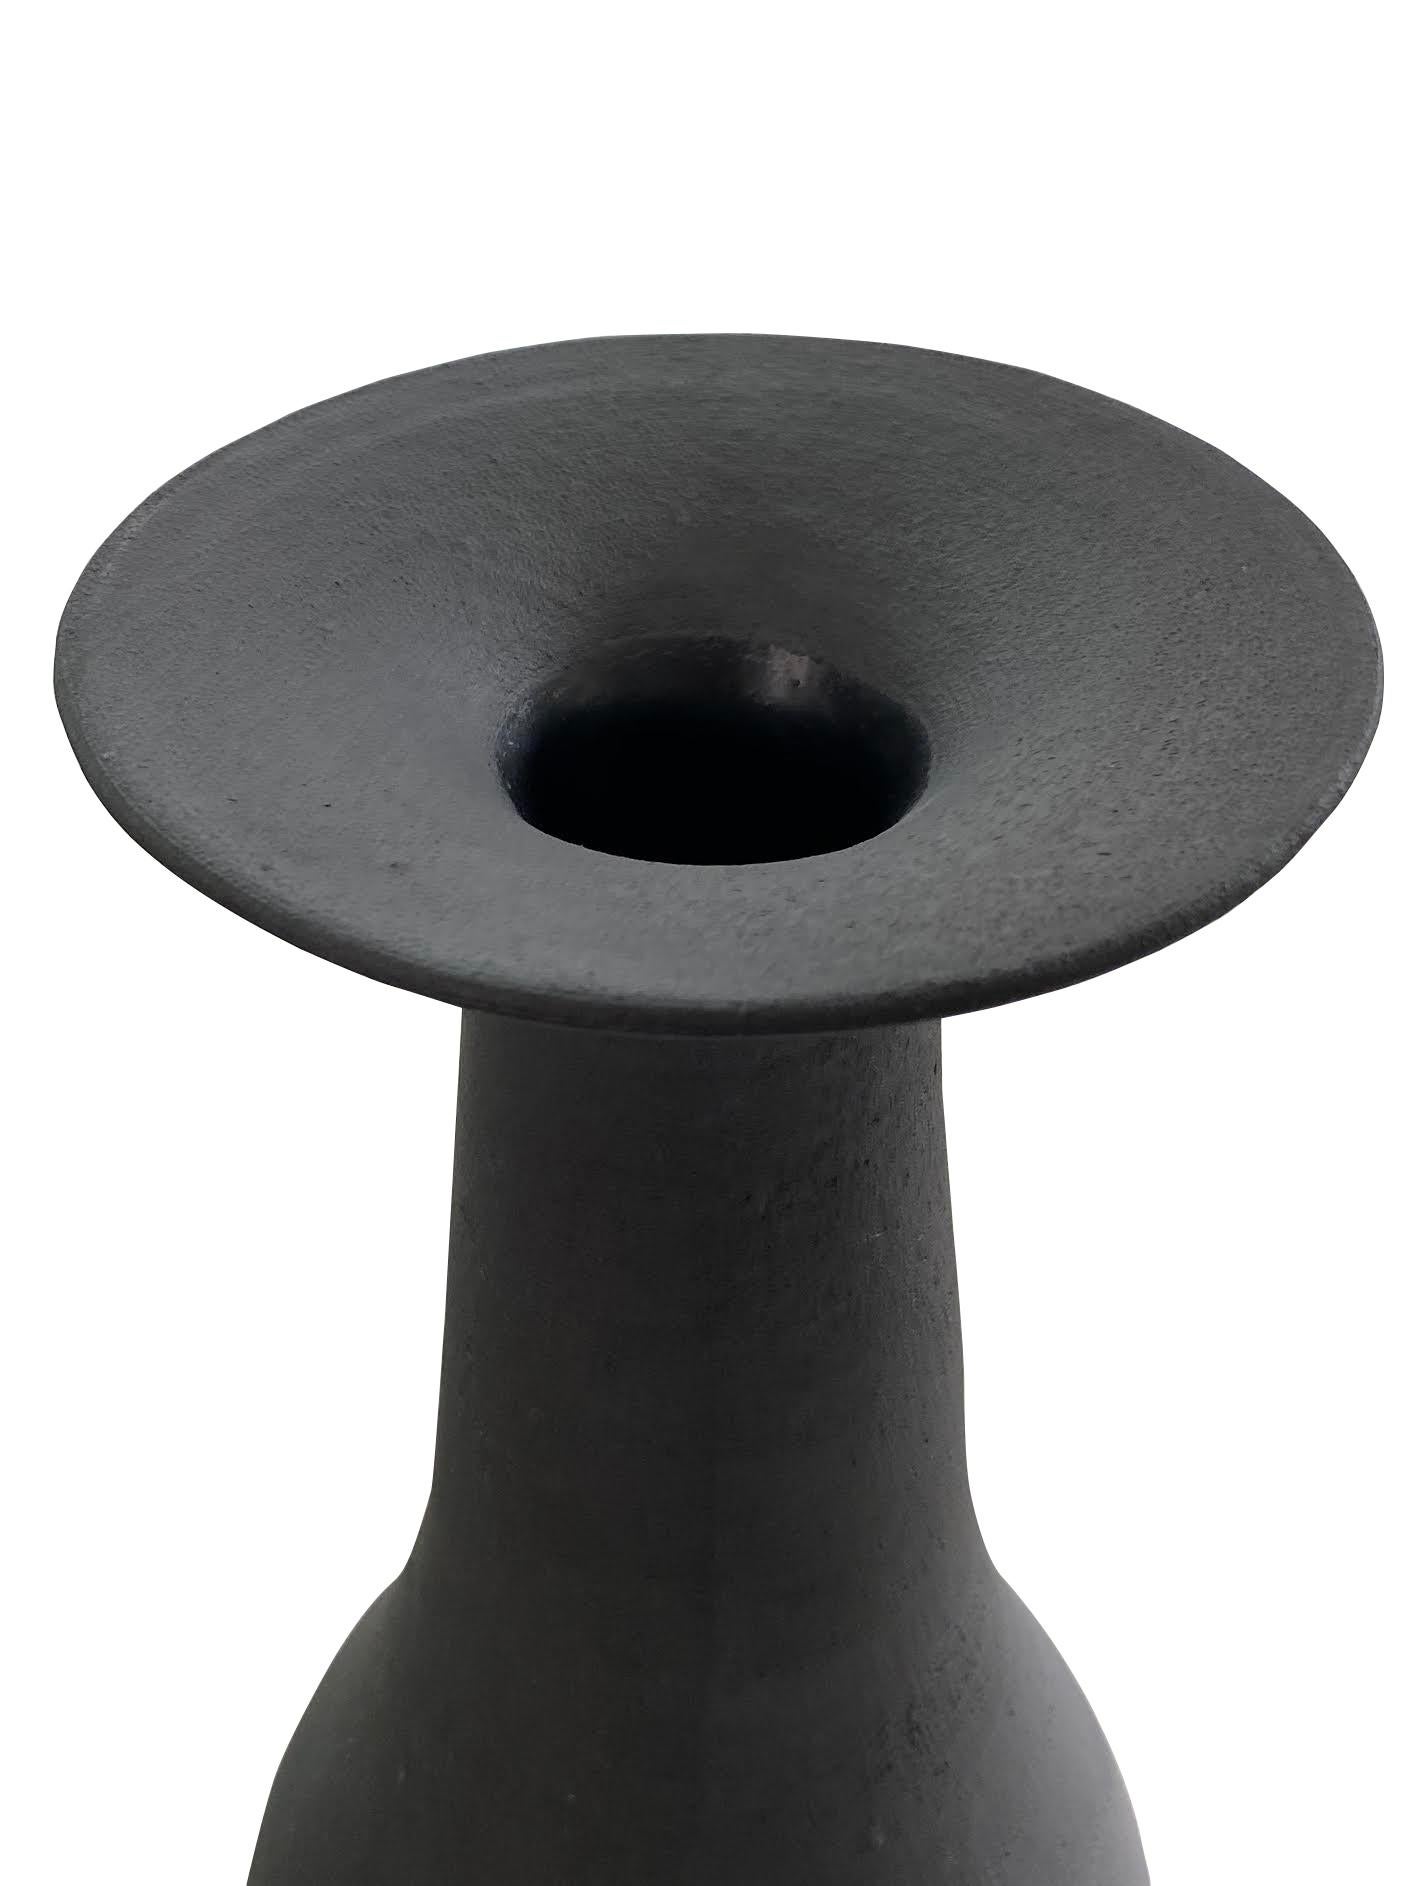 Contemporary American ceramicist Sandi Fellman smooth tall black vase.
Stoneware, black terra sigillata (fine black slip).
Heavy in weight designed to hold large branches for display purposes.
Can hold water.
One of a collection of three (S5650